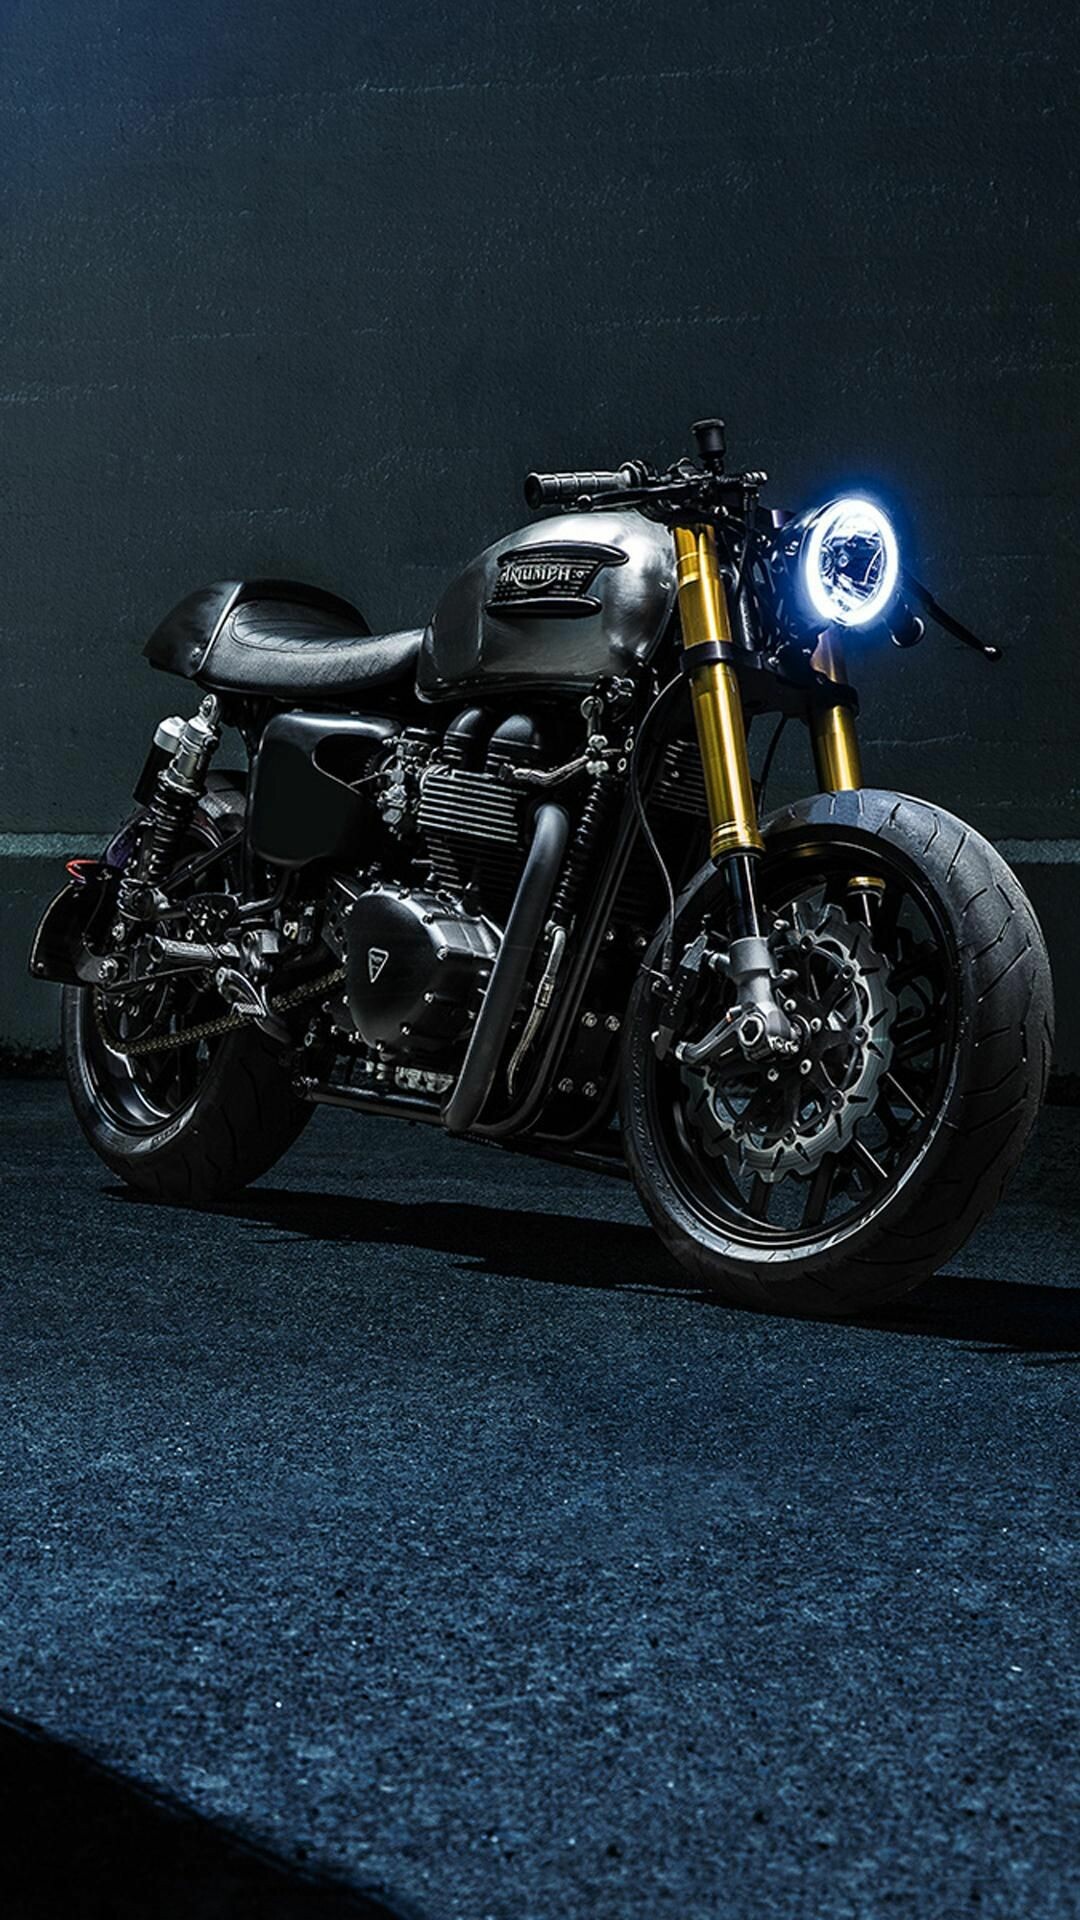 Triumph Motorcycles: Thruxton 1200, Parallel-twin engines, Sports styling. 1080x1920 Full HD Wallpaper.